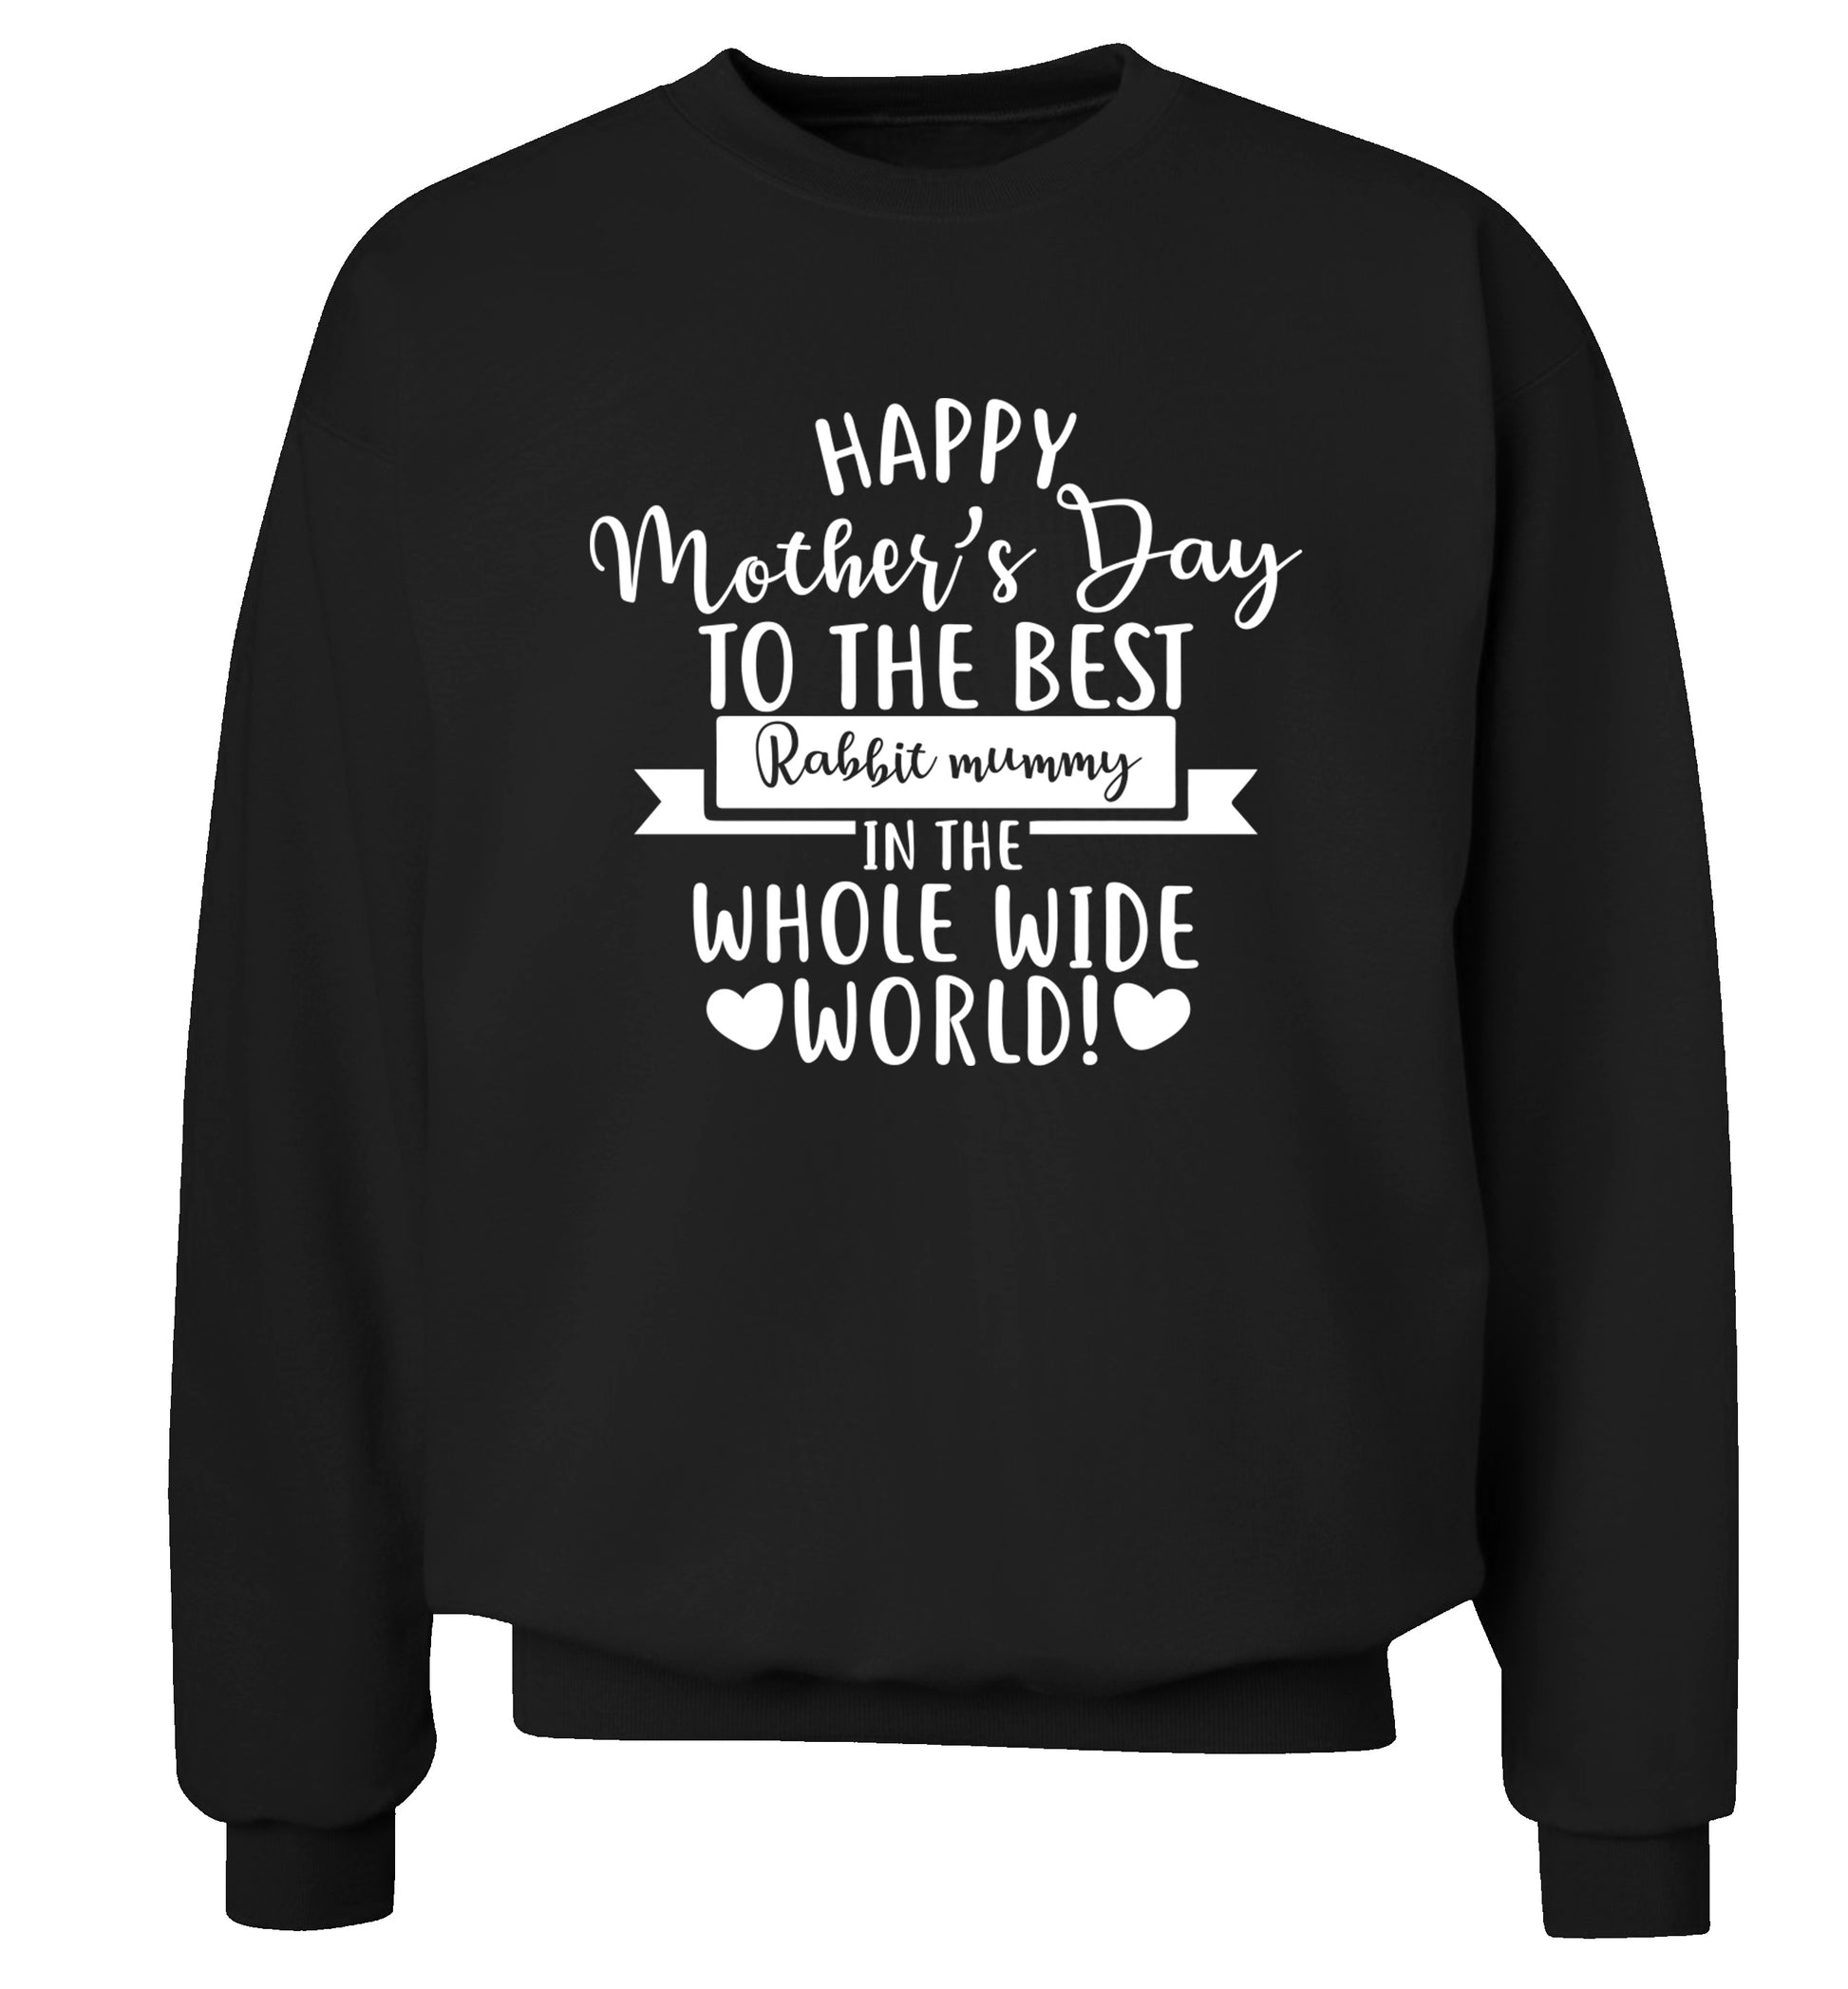 Happy mother's day to the best rabbit mummy in the world Adult's unisex black Sweater 2XL